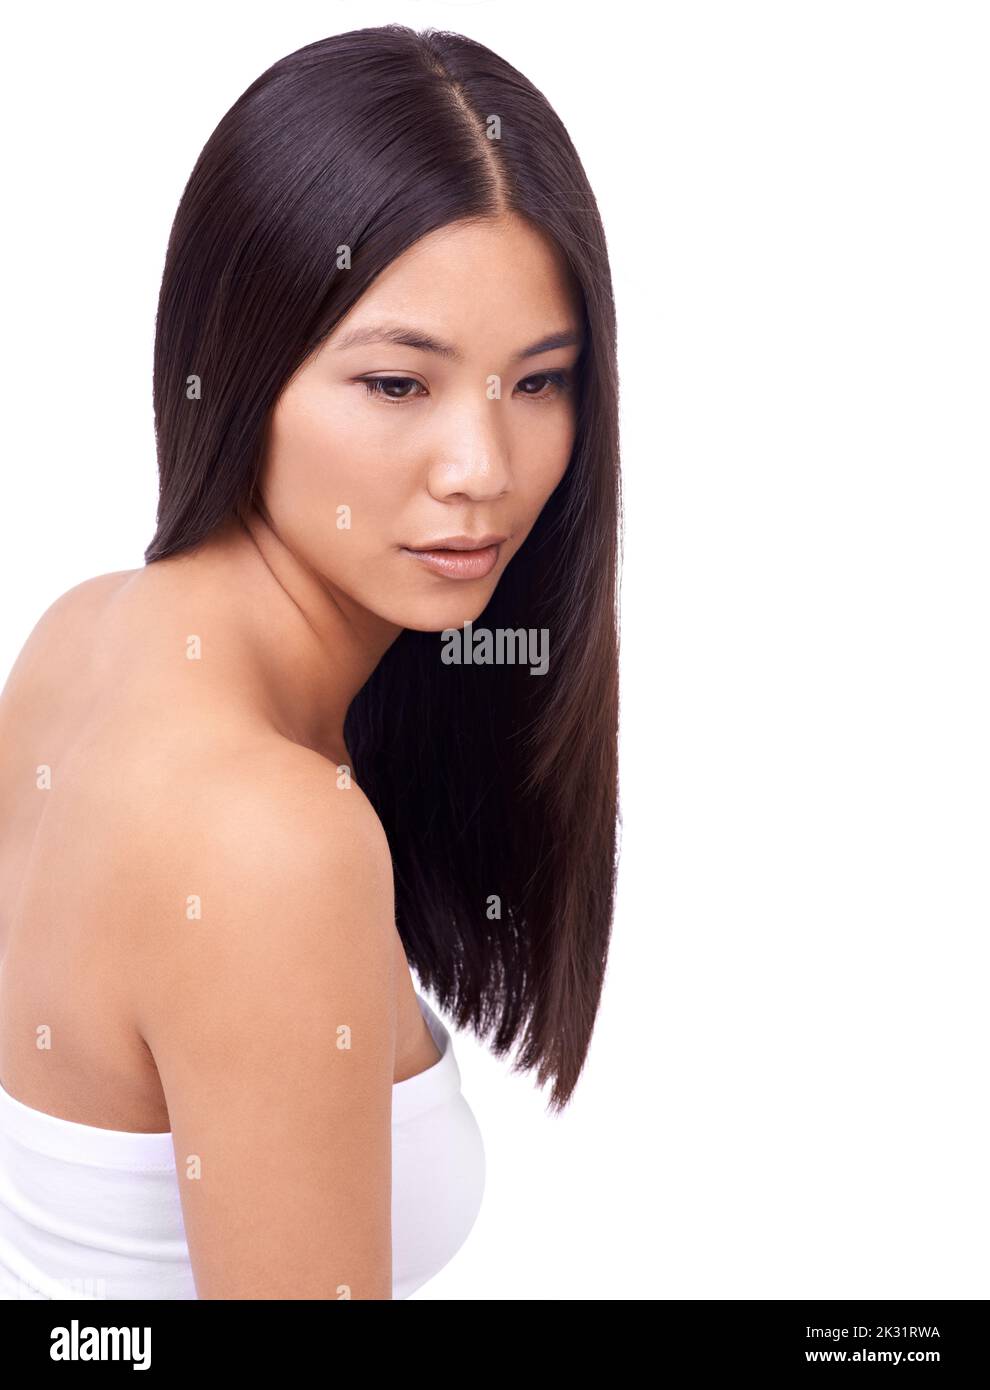 Effortless beauty. a beautiful young oriental woman against a white background. Stock Photo